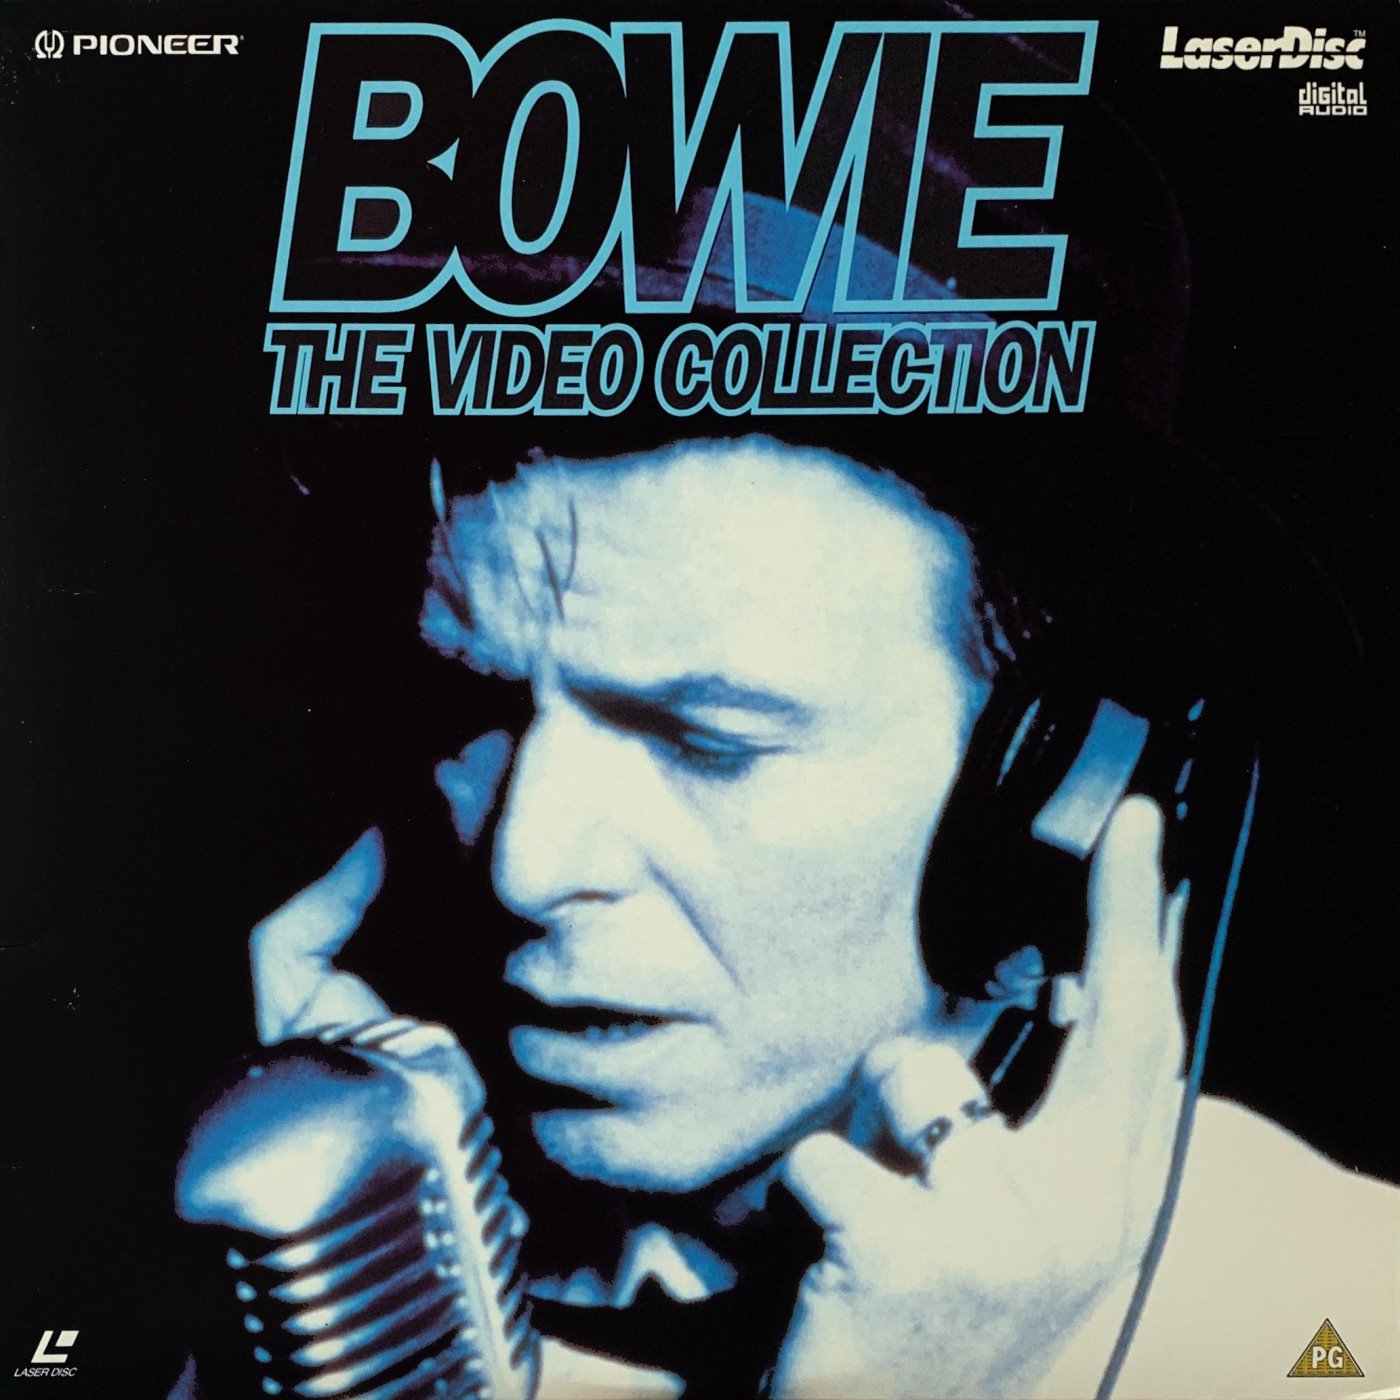 Cover - Bowie - The Video Collection.jpg